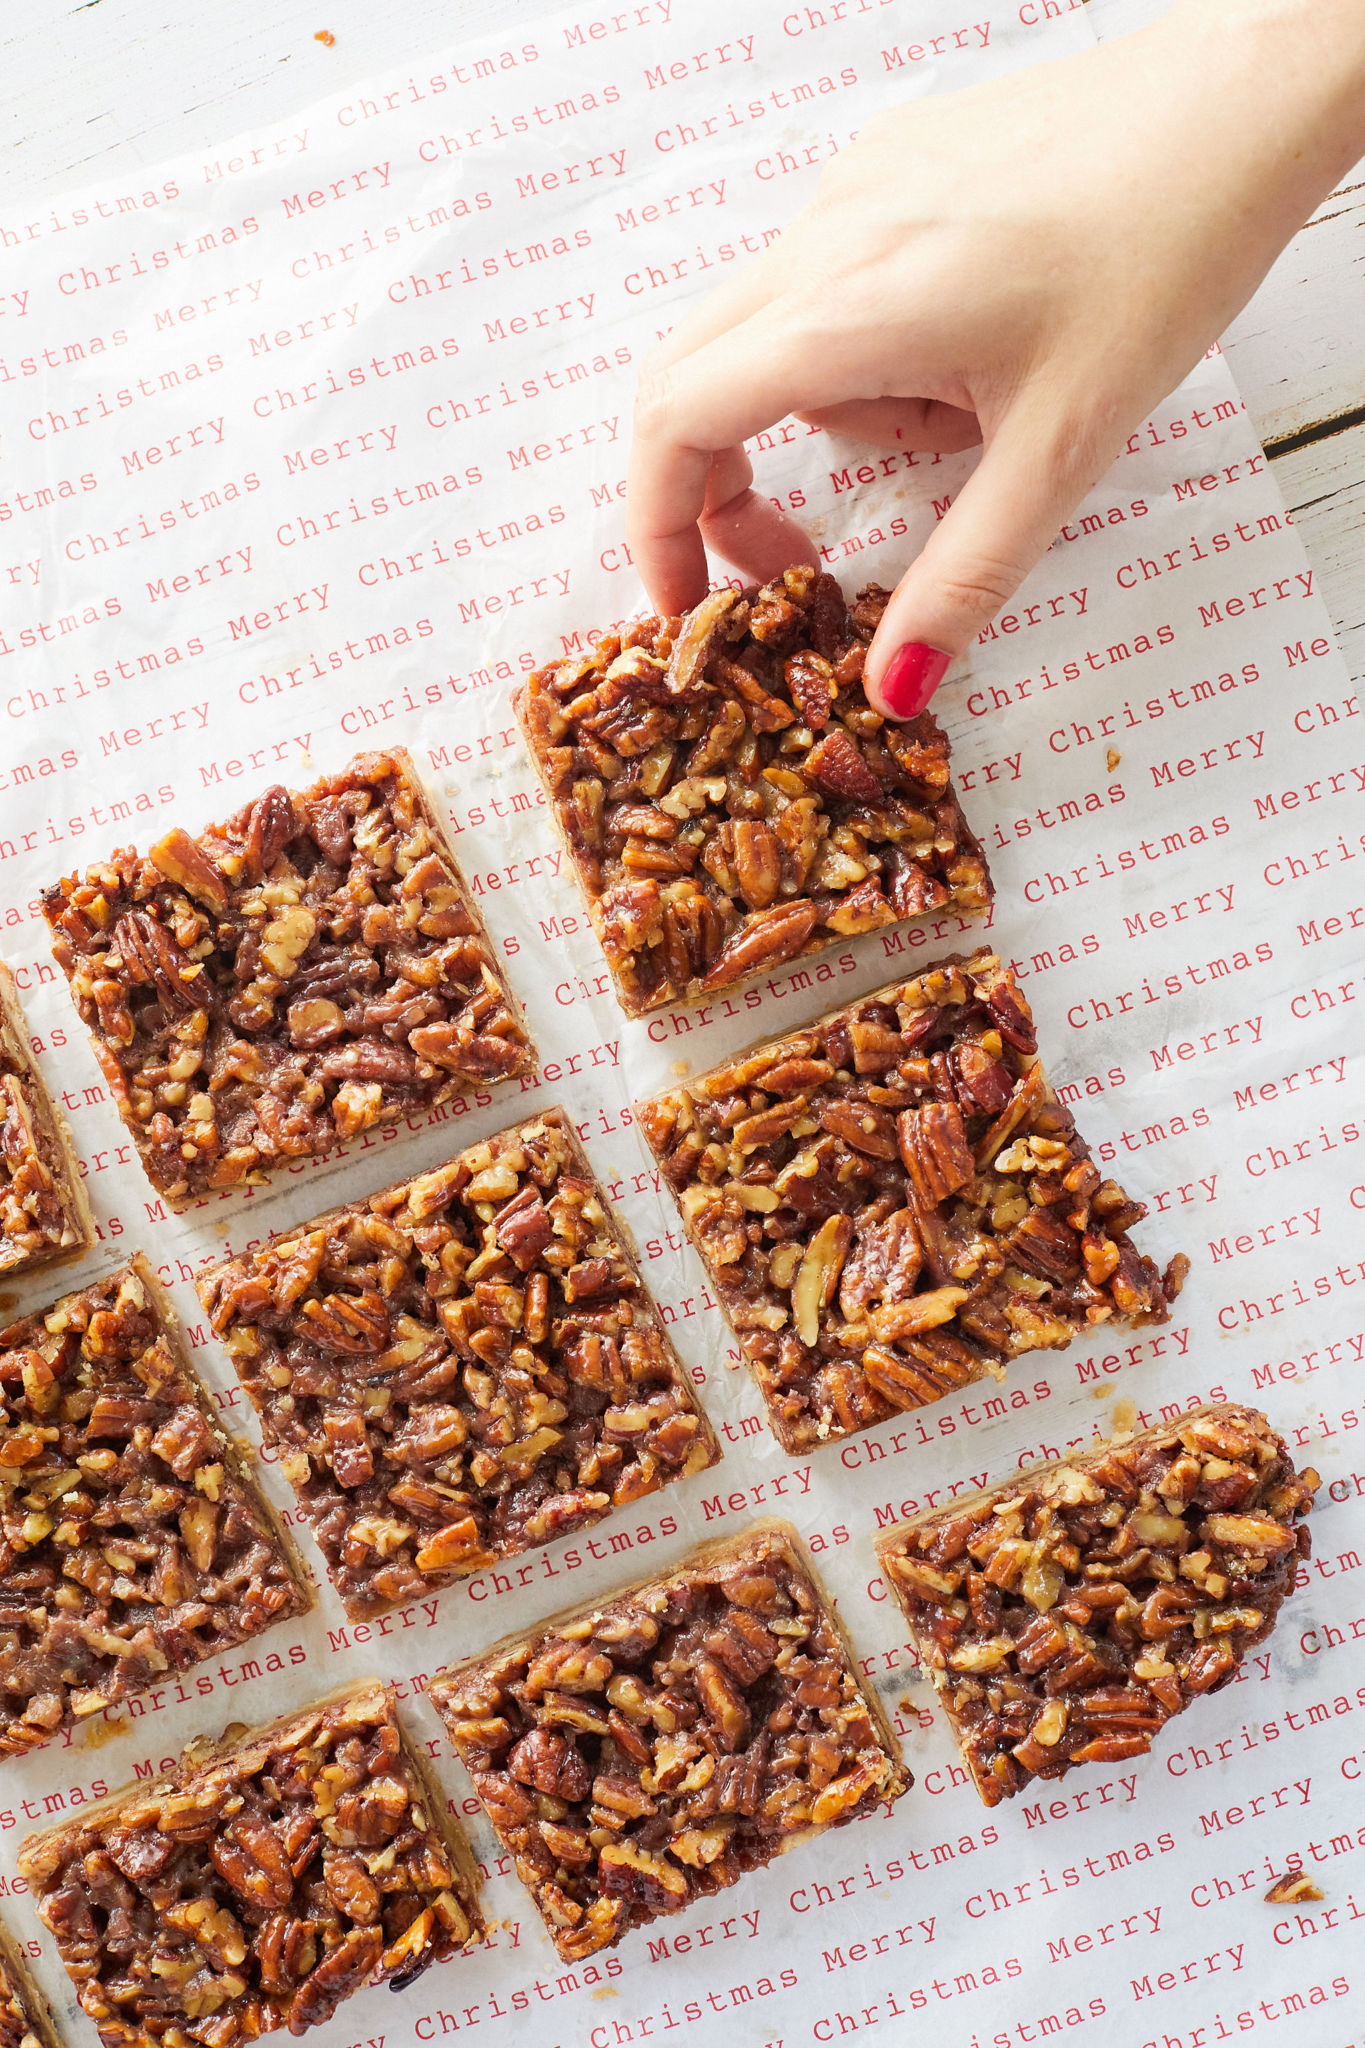 A hand selecting a maple pecan bar from a grid of them.